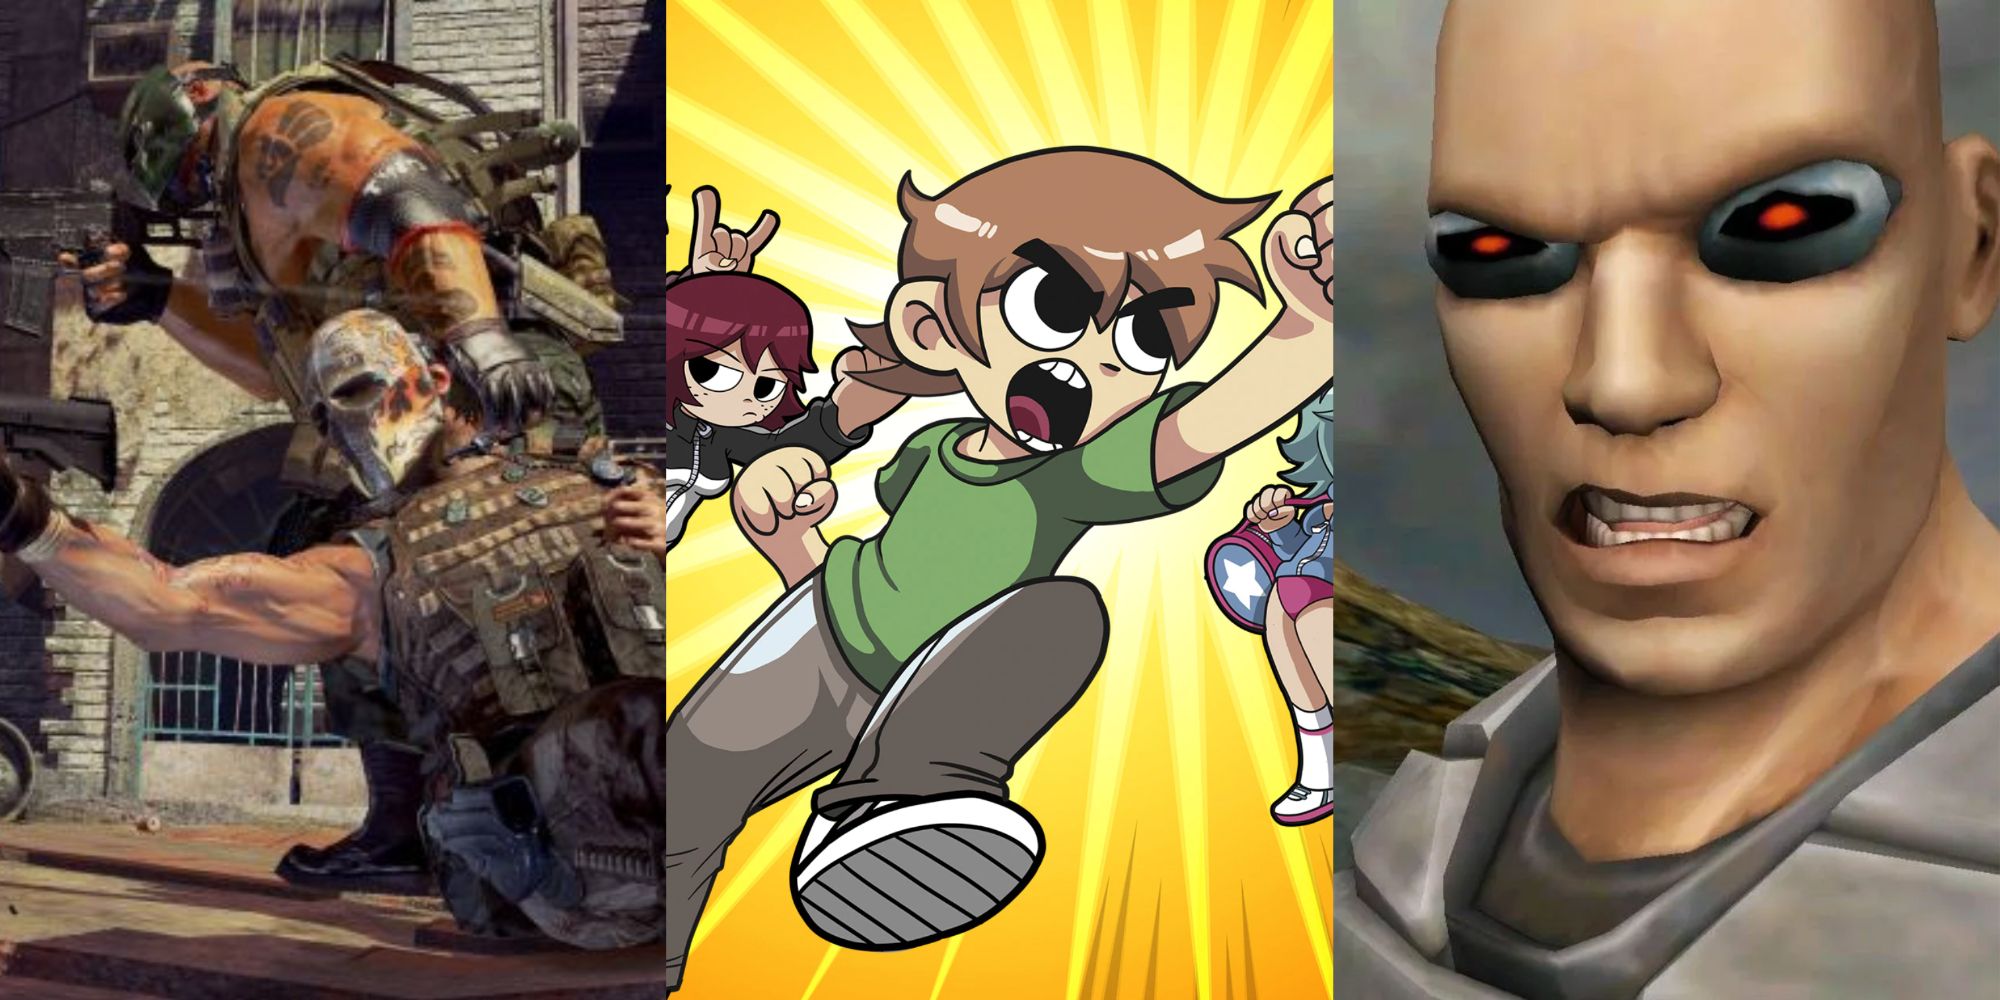 Co-op Games I've Been Trying To Get People To Play Featured - Army Of Two, Scott Pilgrim Vs. The World, TimeSplitters